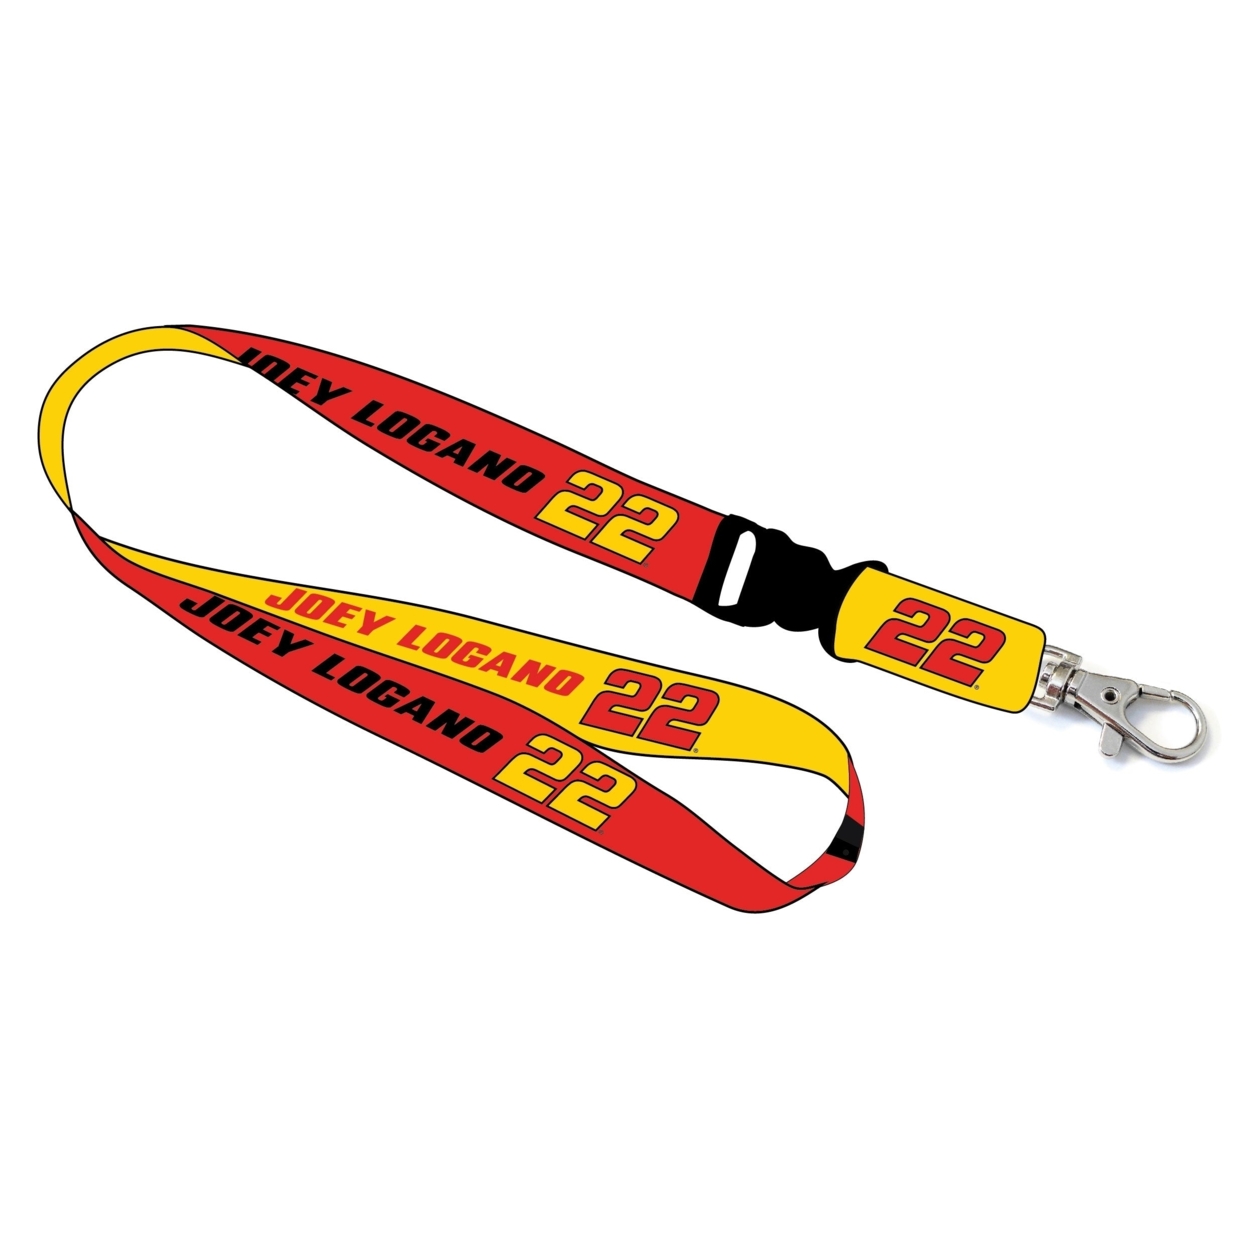 Joey Logano #22 NASCAR Cup Series Lanyard New For 2021